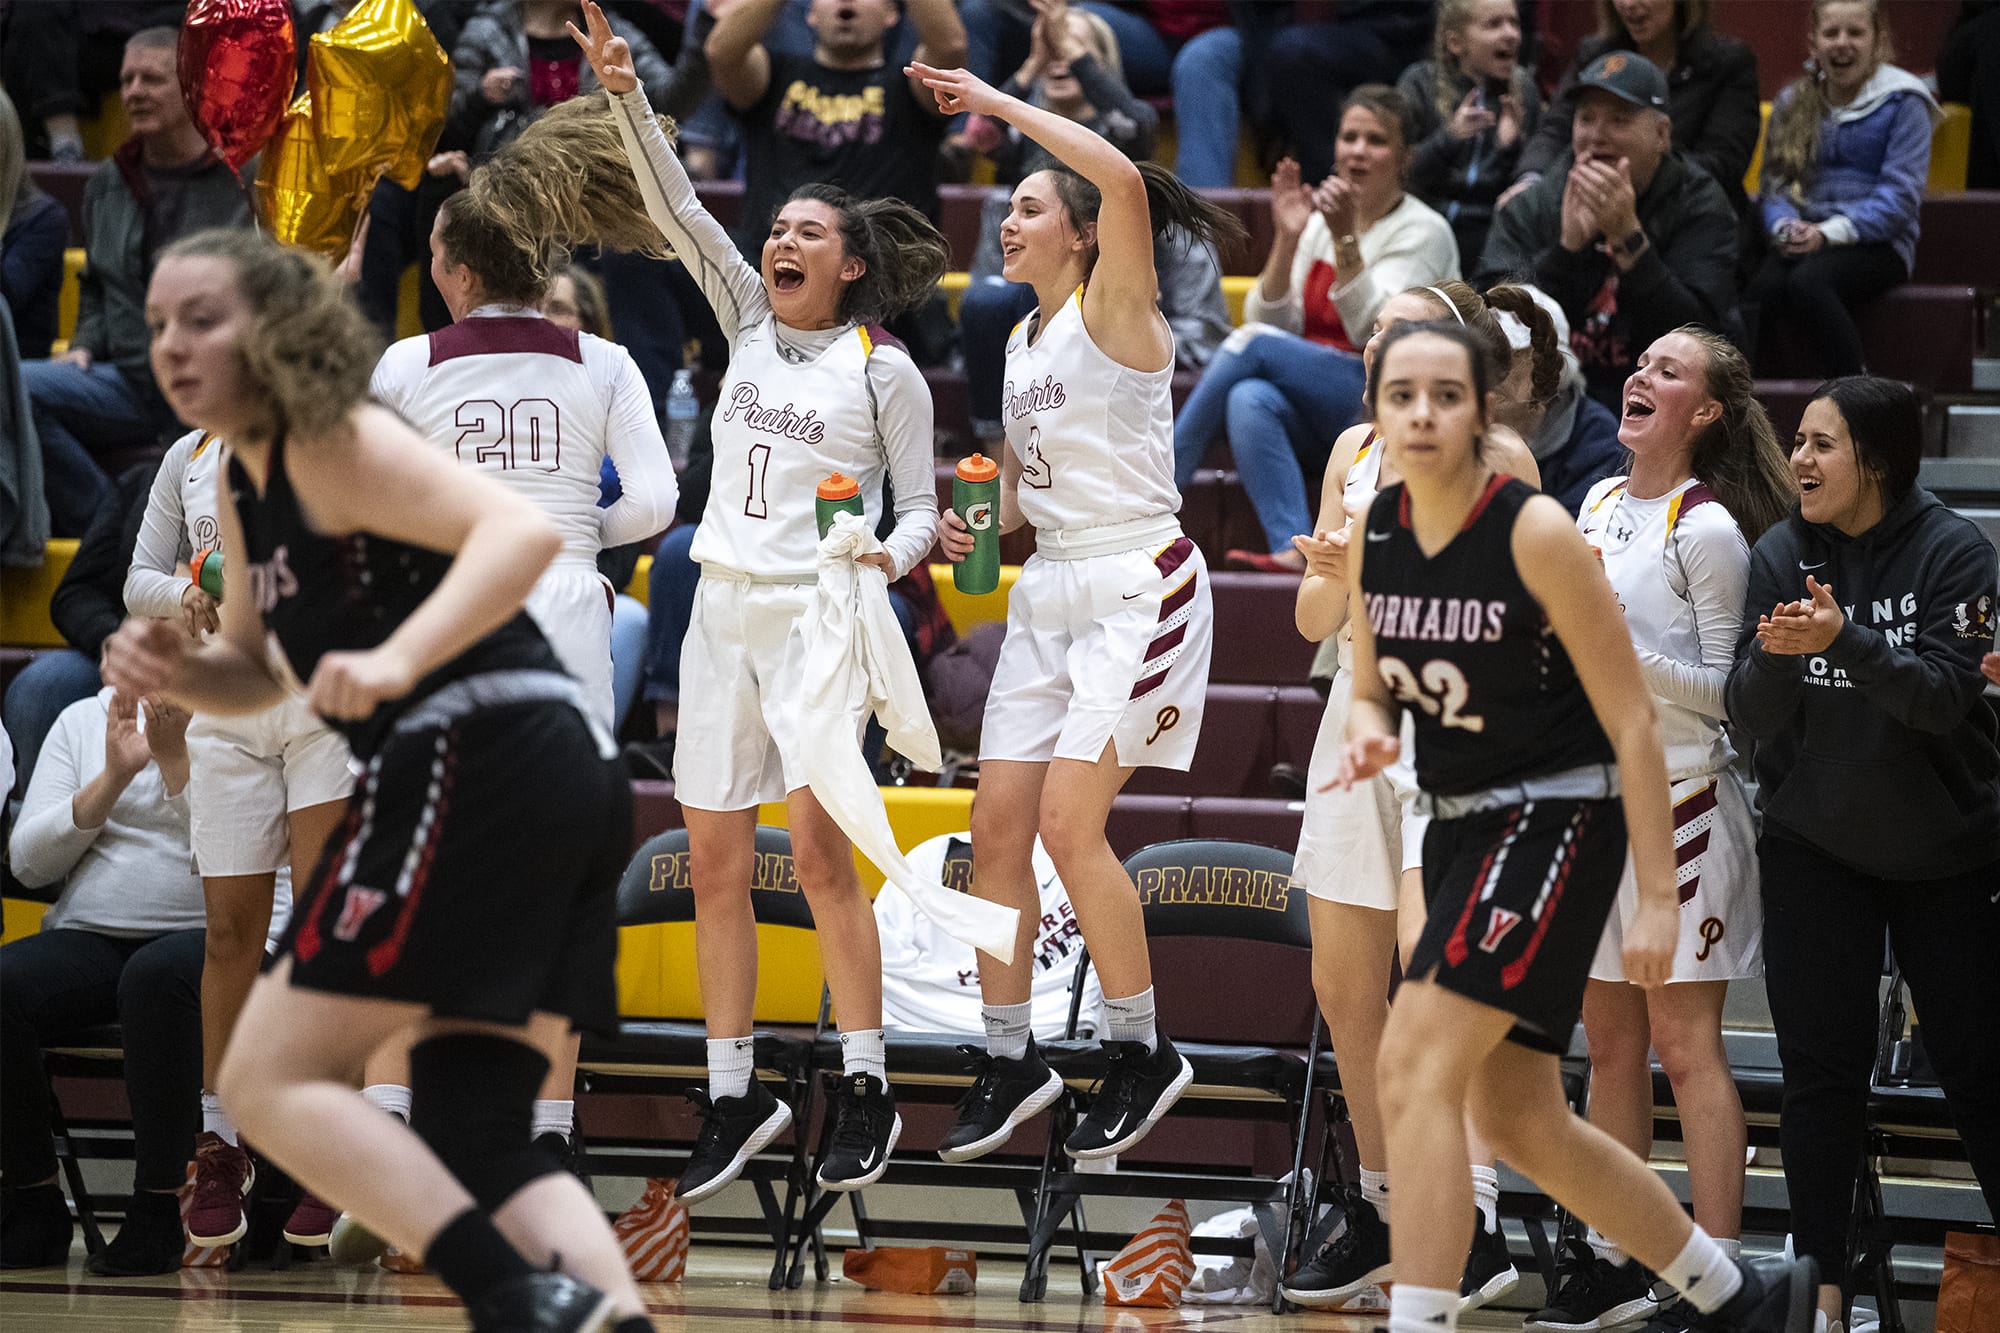 The Prairie bench reacts to a three during a game against Yelm at Prairie High School on Friday night, Feb. 14, 2020.